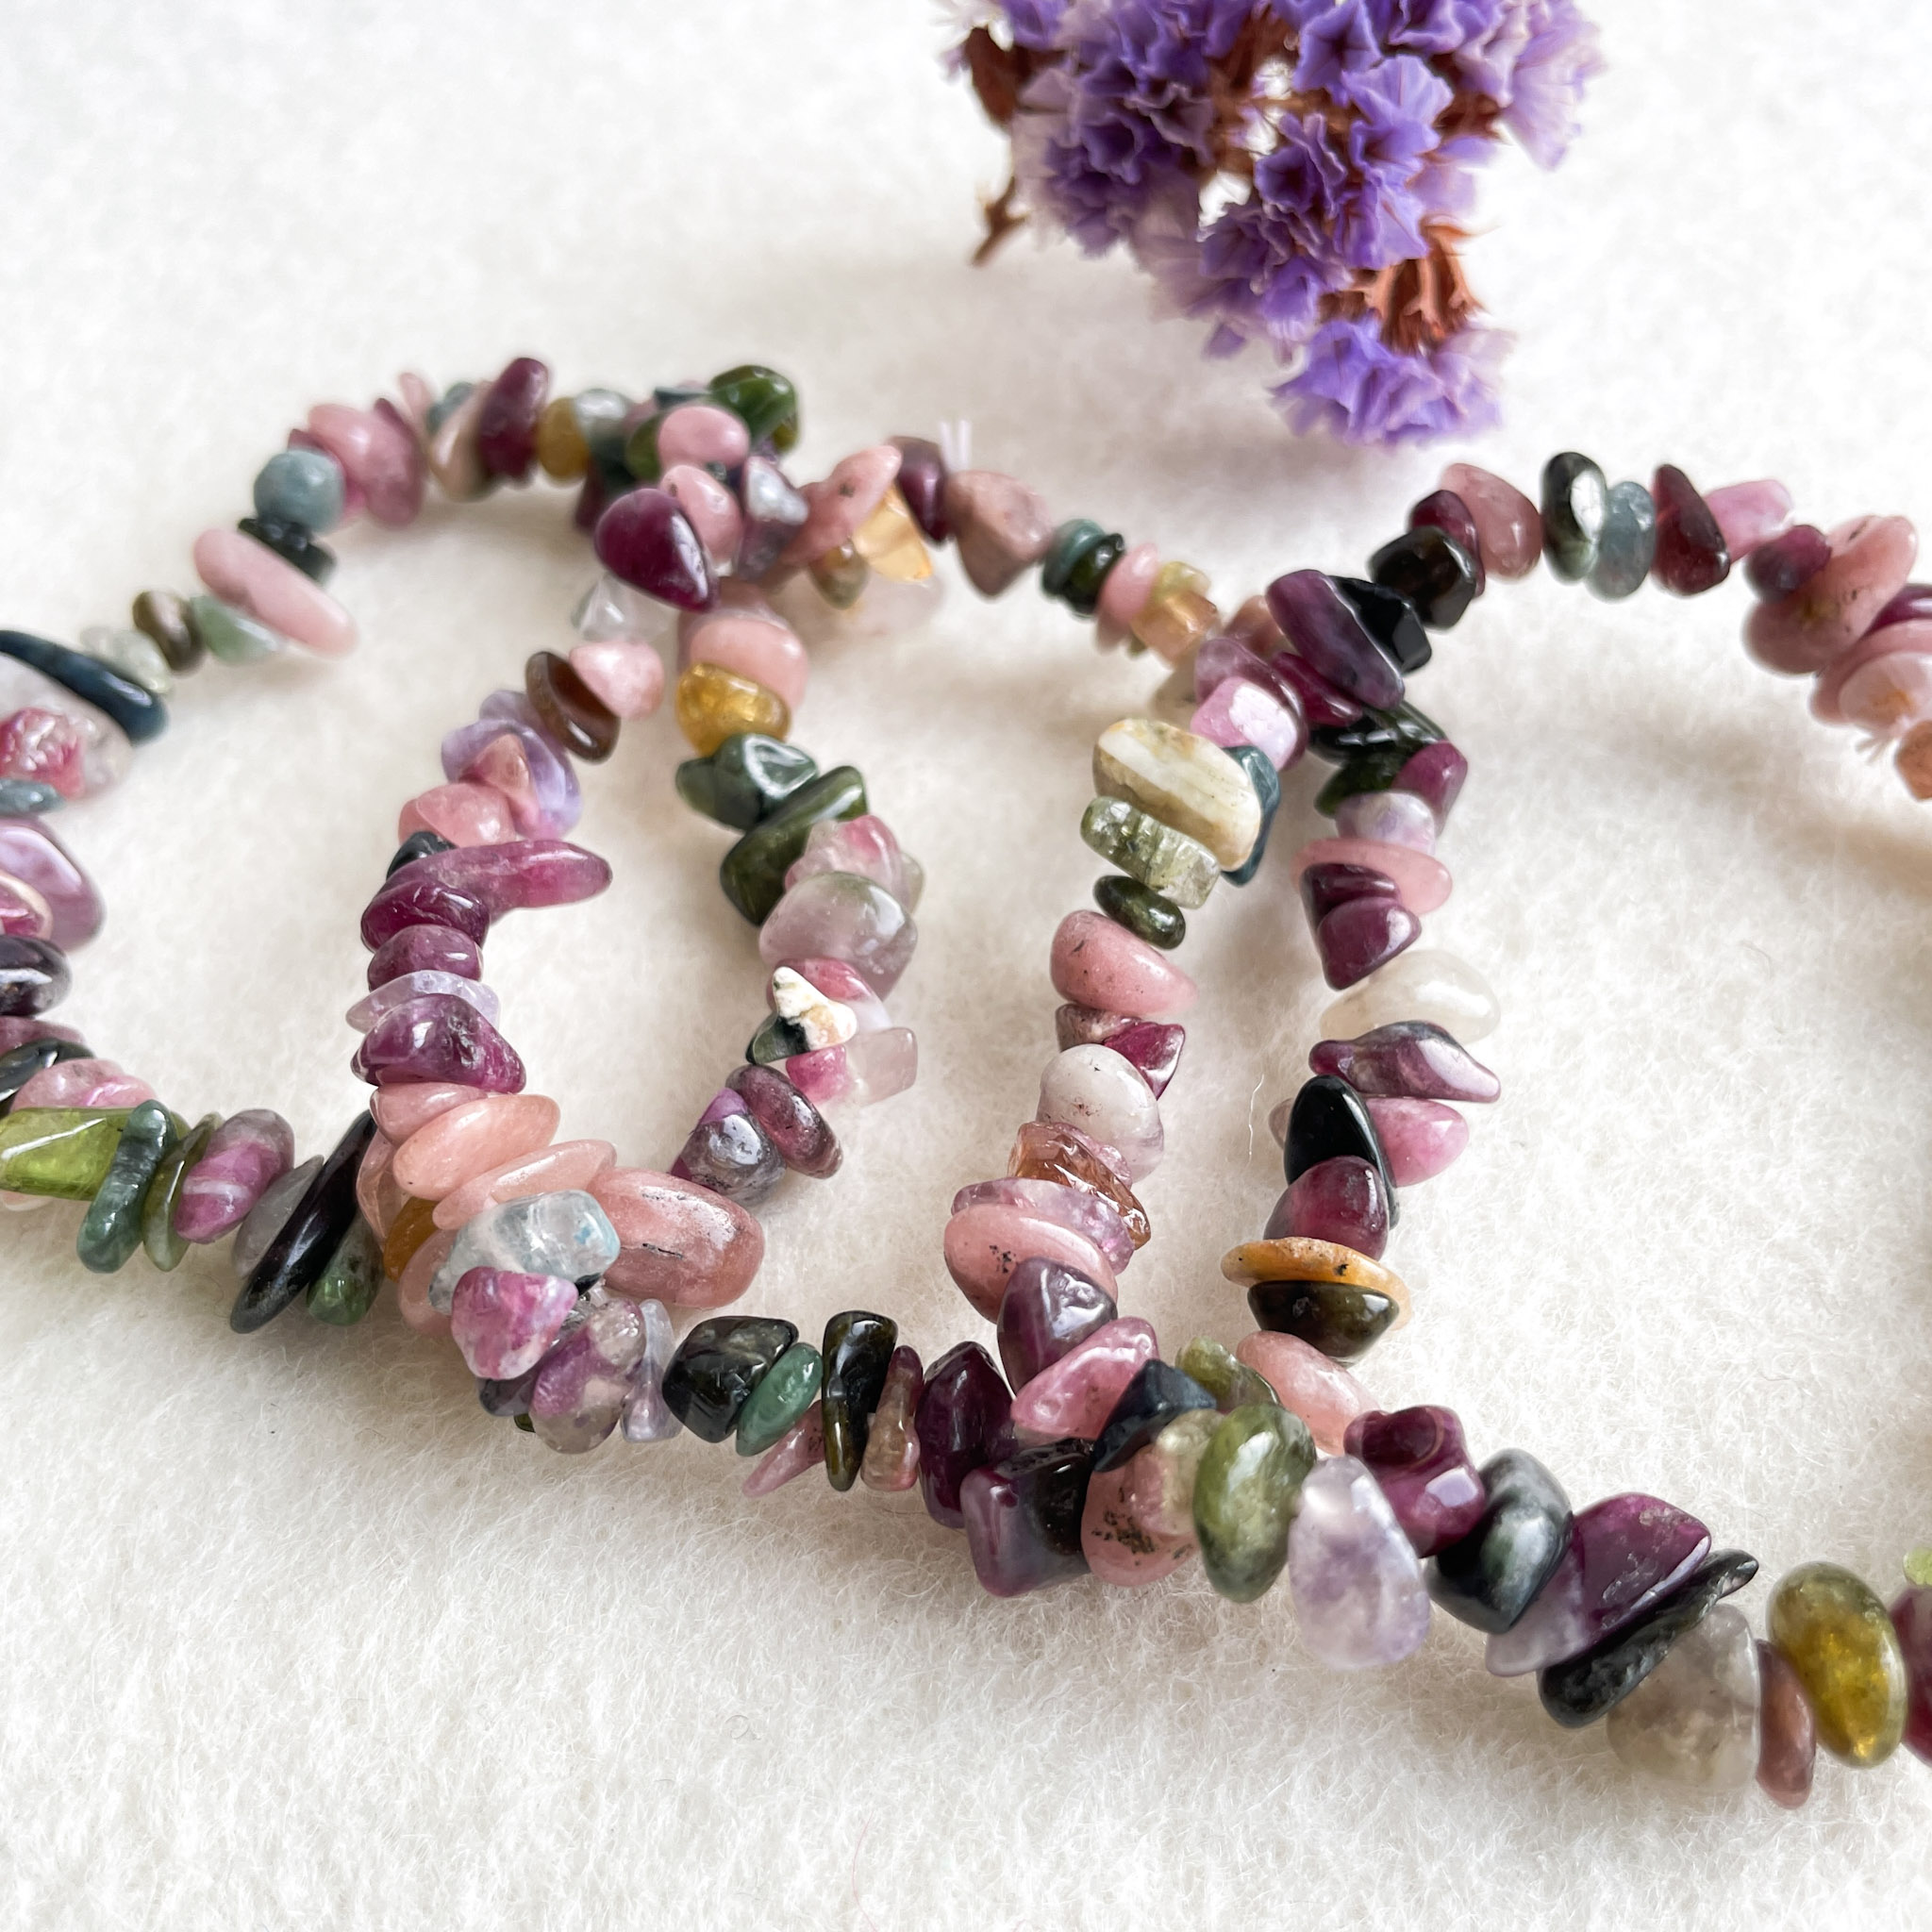 A beaded bracelet made of various colors of tourmaline strands on a white textured background, with a bundle of dried purple flowers in the upper right corner.